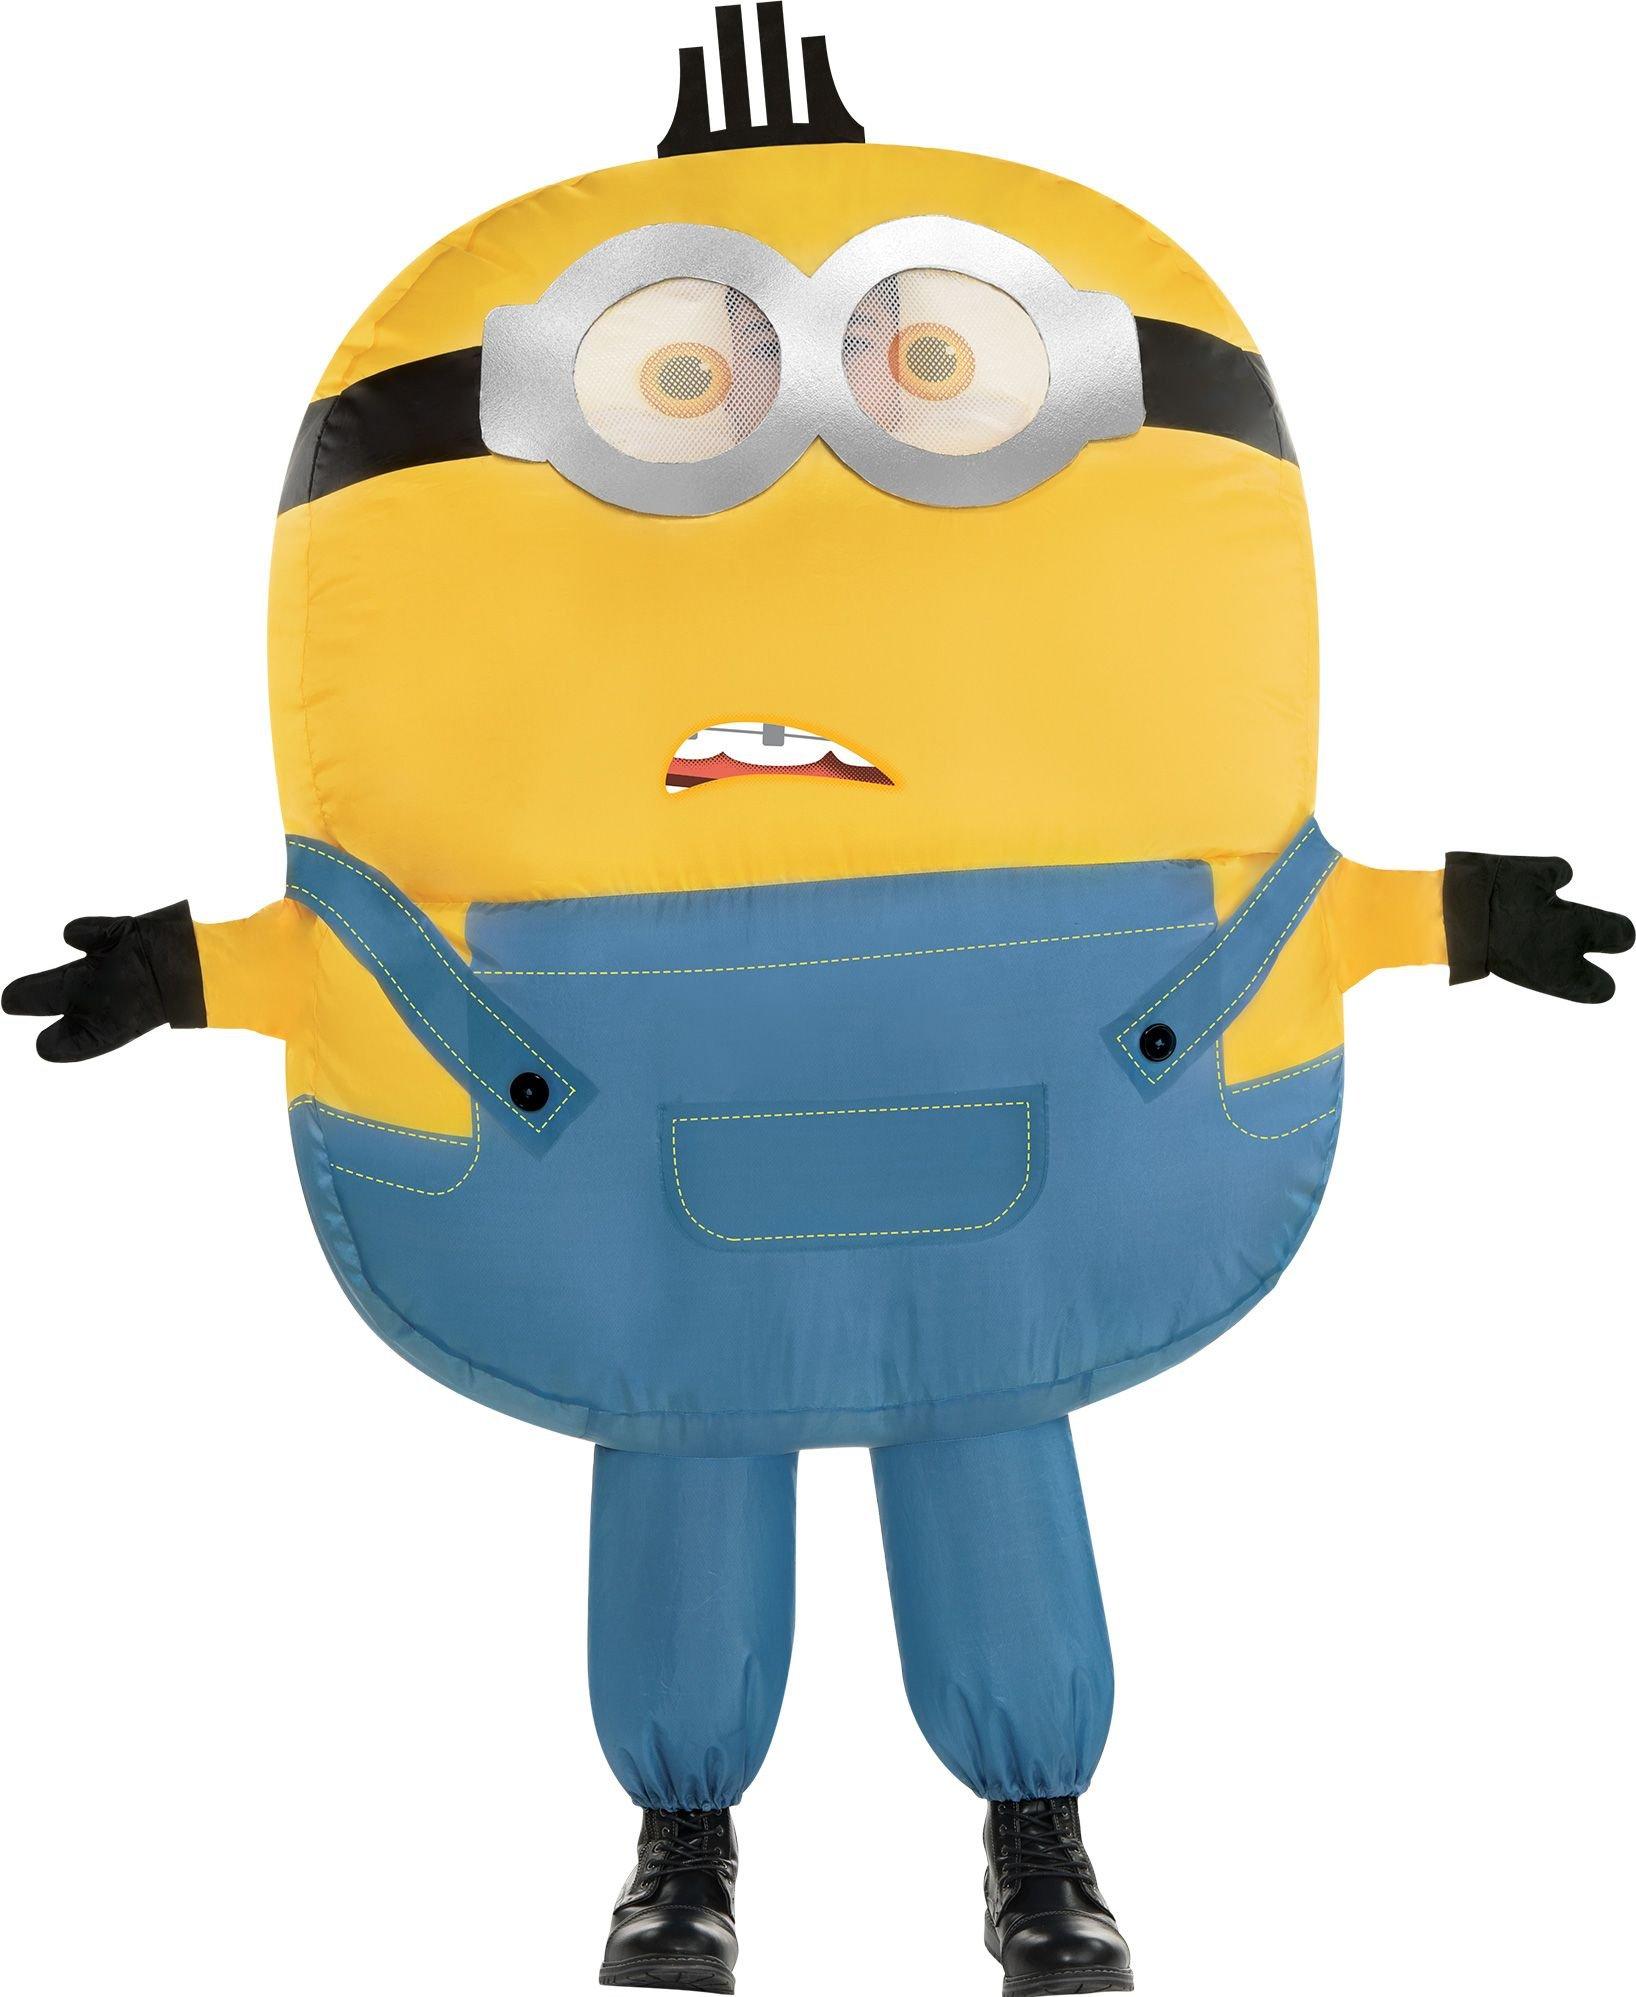 Otto Minion Inflatable Costume for Kids - The Rise of Gru | Party City